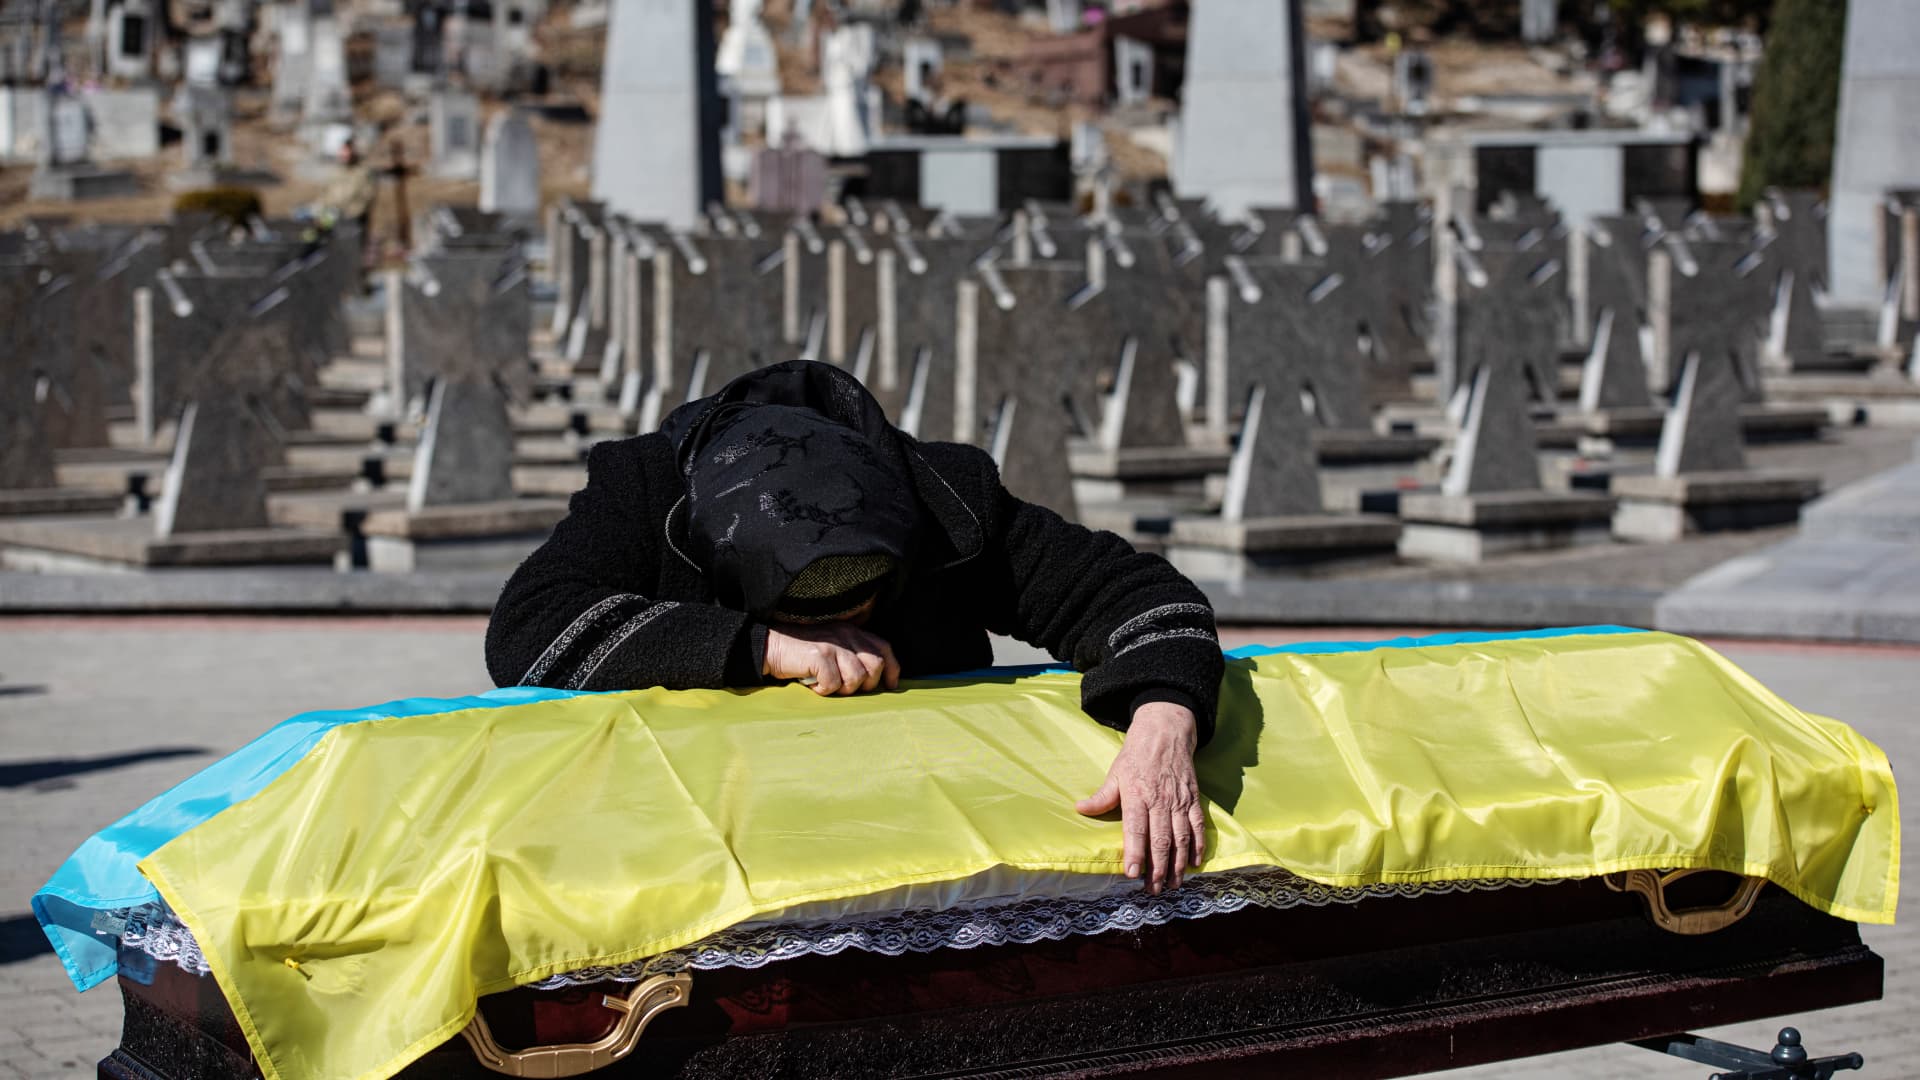 The mother of Ukrainian officer Ivan Skrypnyk cries over the coffin with the body of her son, during the funeral ceremony on March 17, 2022 in Lviv, Ukraine.